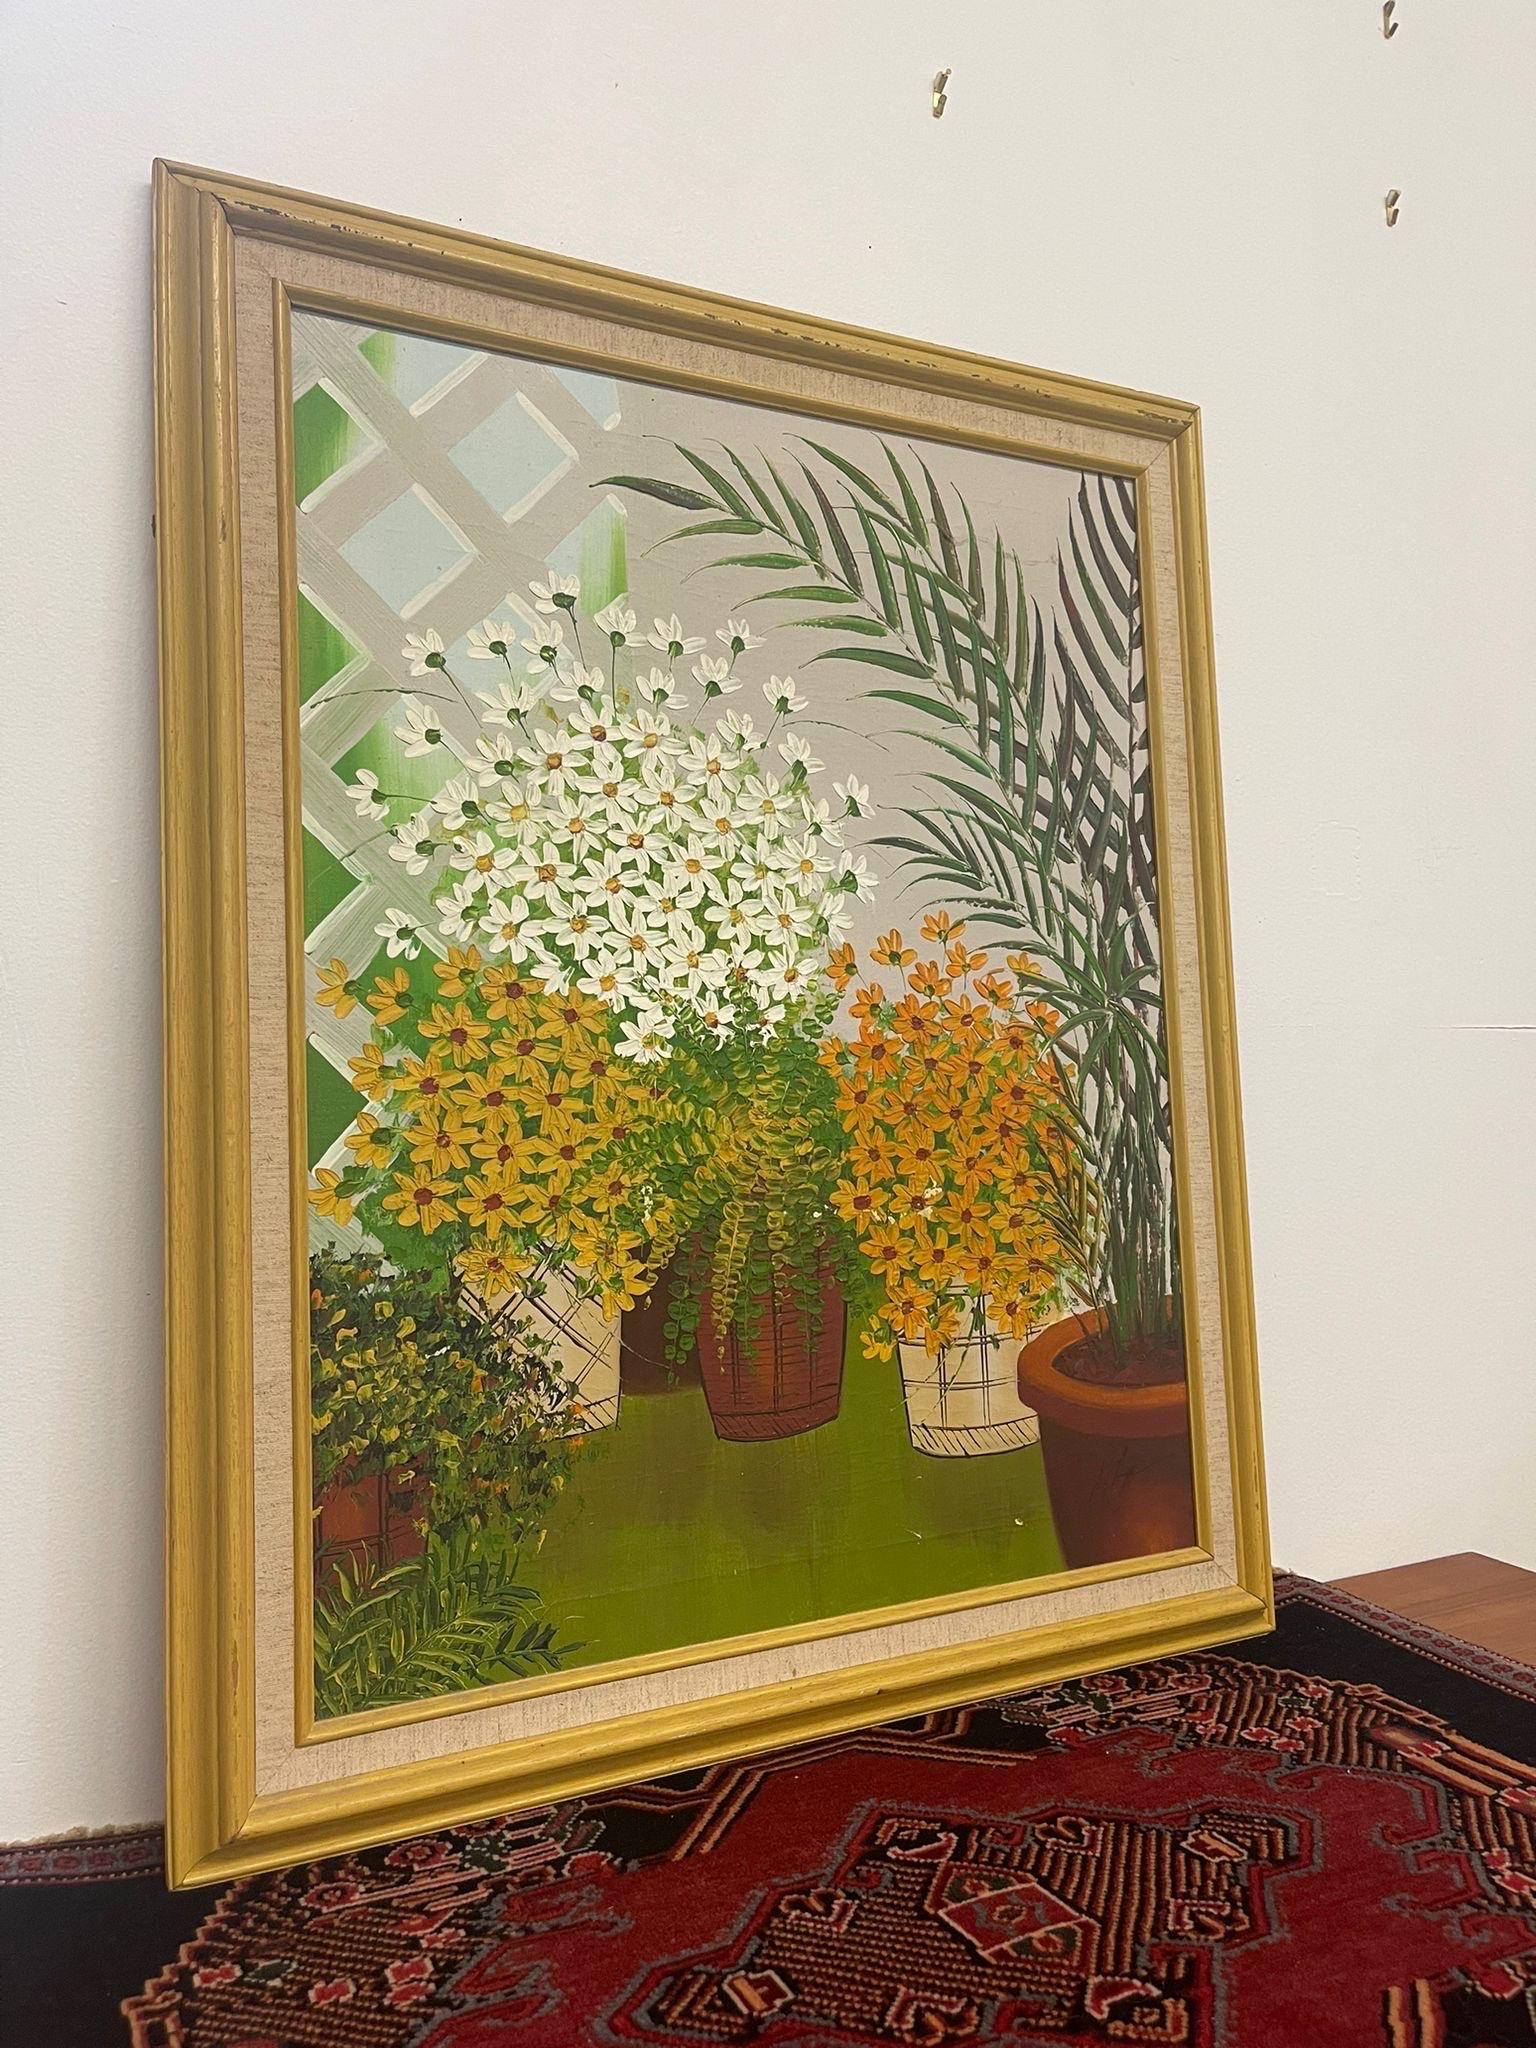 Vintage Painting of Daisies and Other Varieties of Plants. Looks to be of the Mid century Modern Period. Signed in the Corner as Pictured.Slight Cracking on the Paint. Vintage Condition Consistent with Age as Pictured.

Dimensions. 27 W ; 3/4 D ; 33